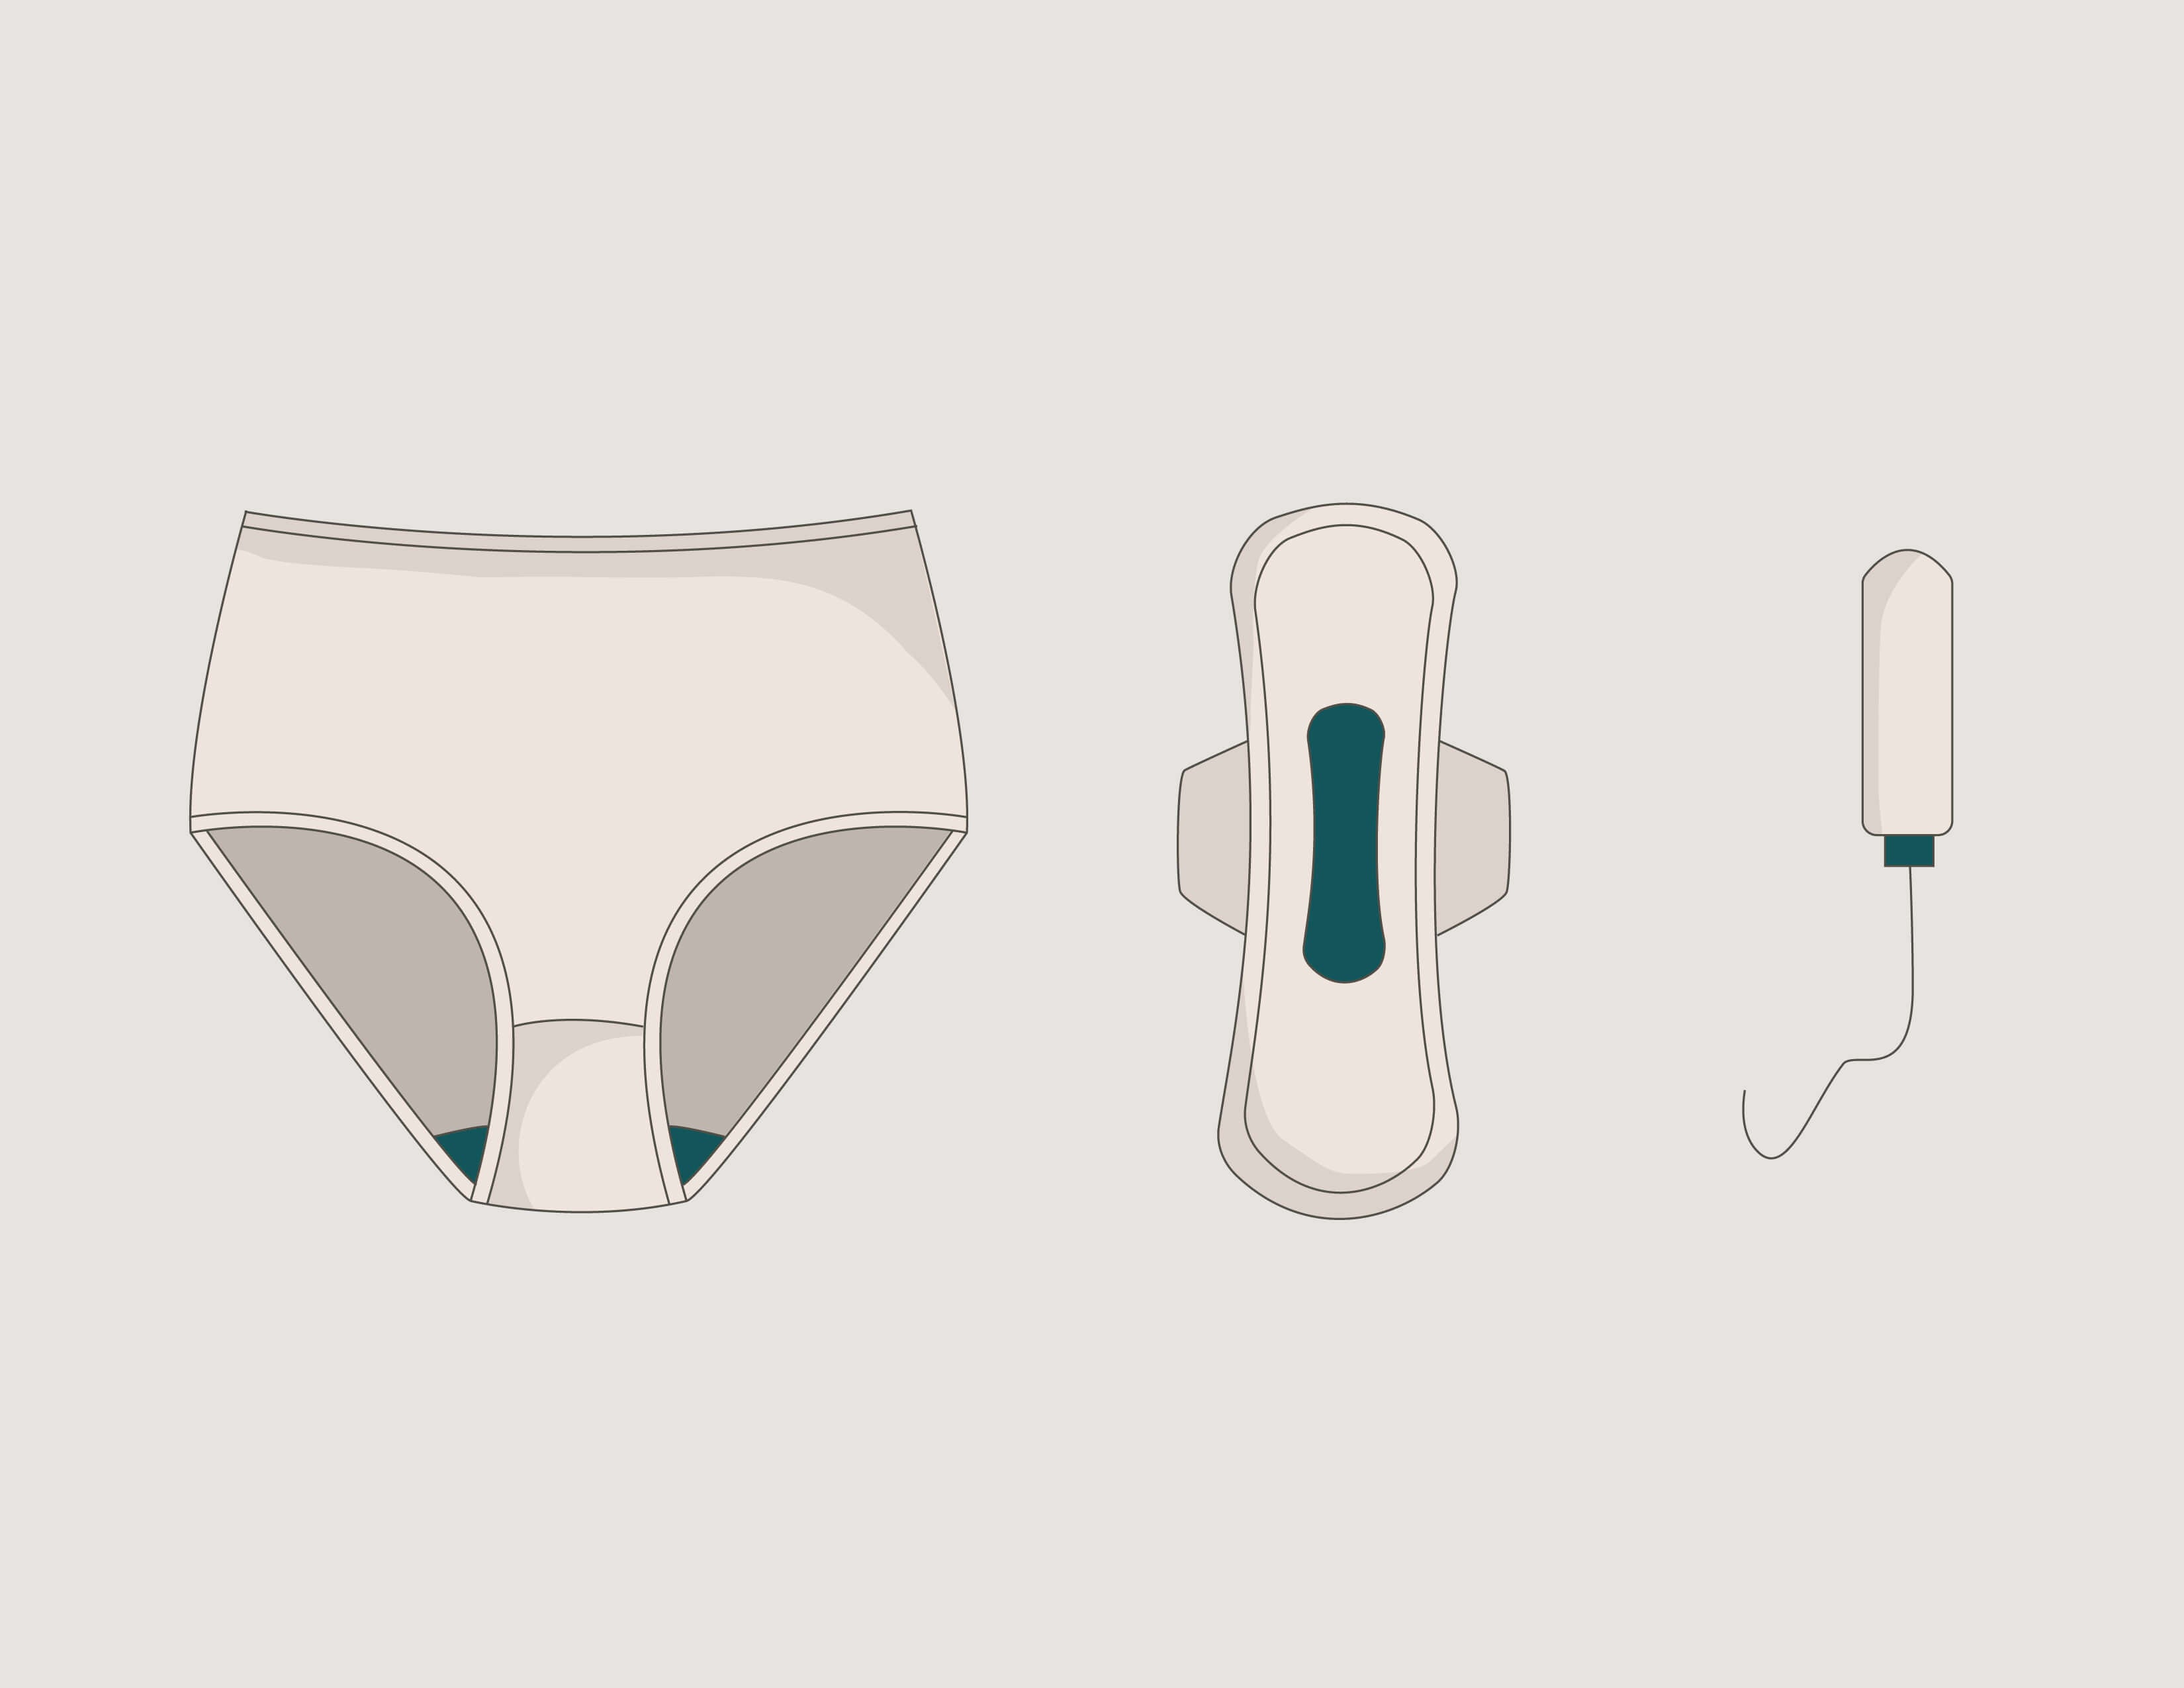 Styles and Types of Women's Underwear: How to Choose The Best For